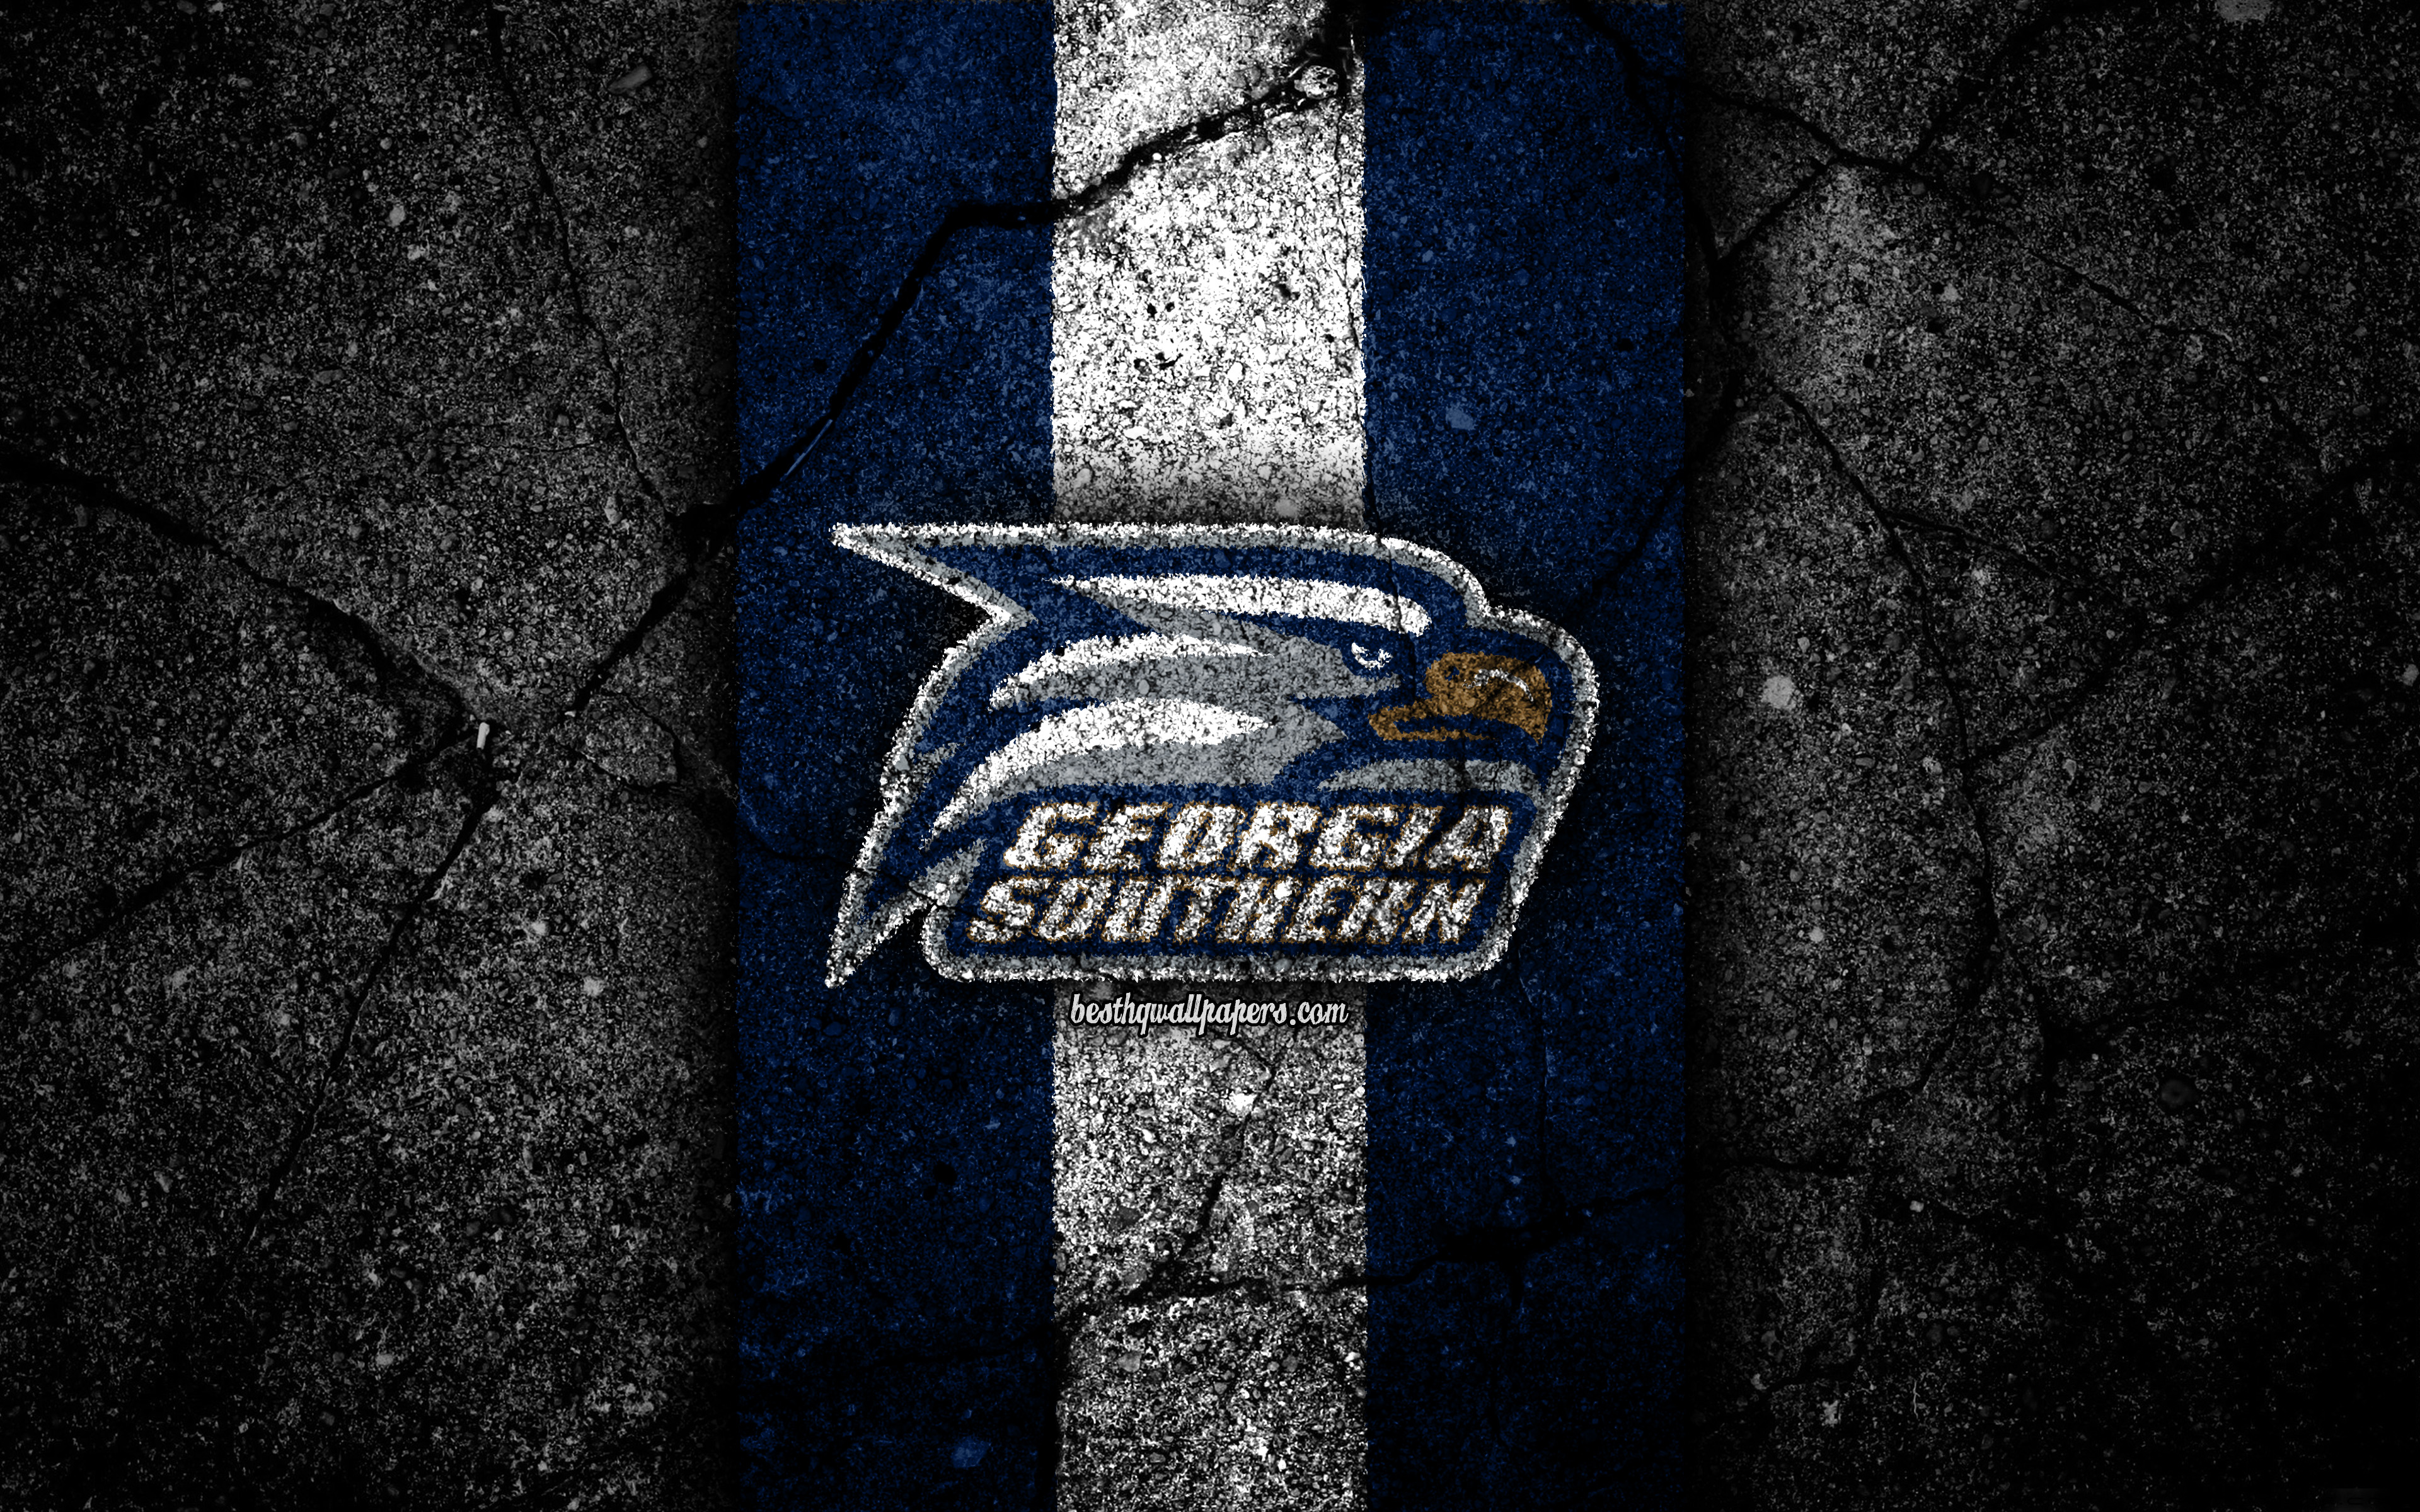 Download wallpaper Georgia Southern Eagles, 4k, american football team, NCAA, blue white stone, USA, asphalt texture, american football, Georgia Southern Eagles logo for desktop with resolution 3840x2400. High Quality HD picture wallpaper